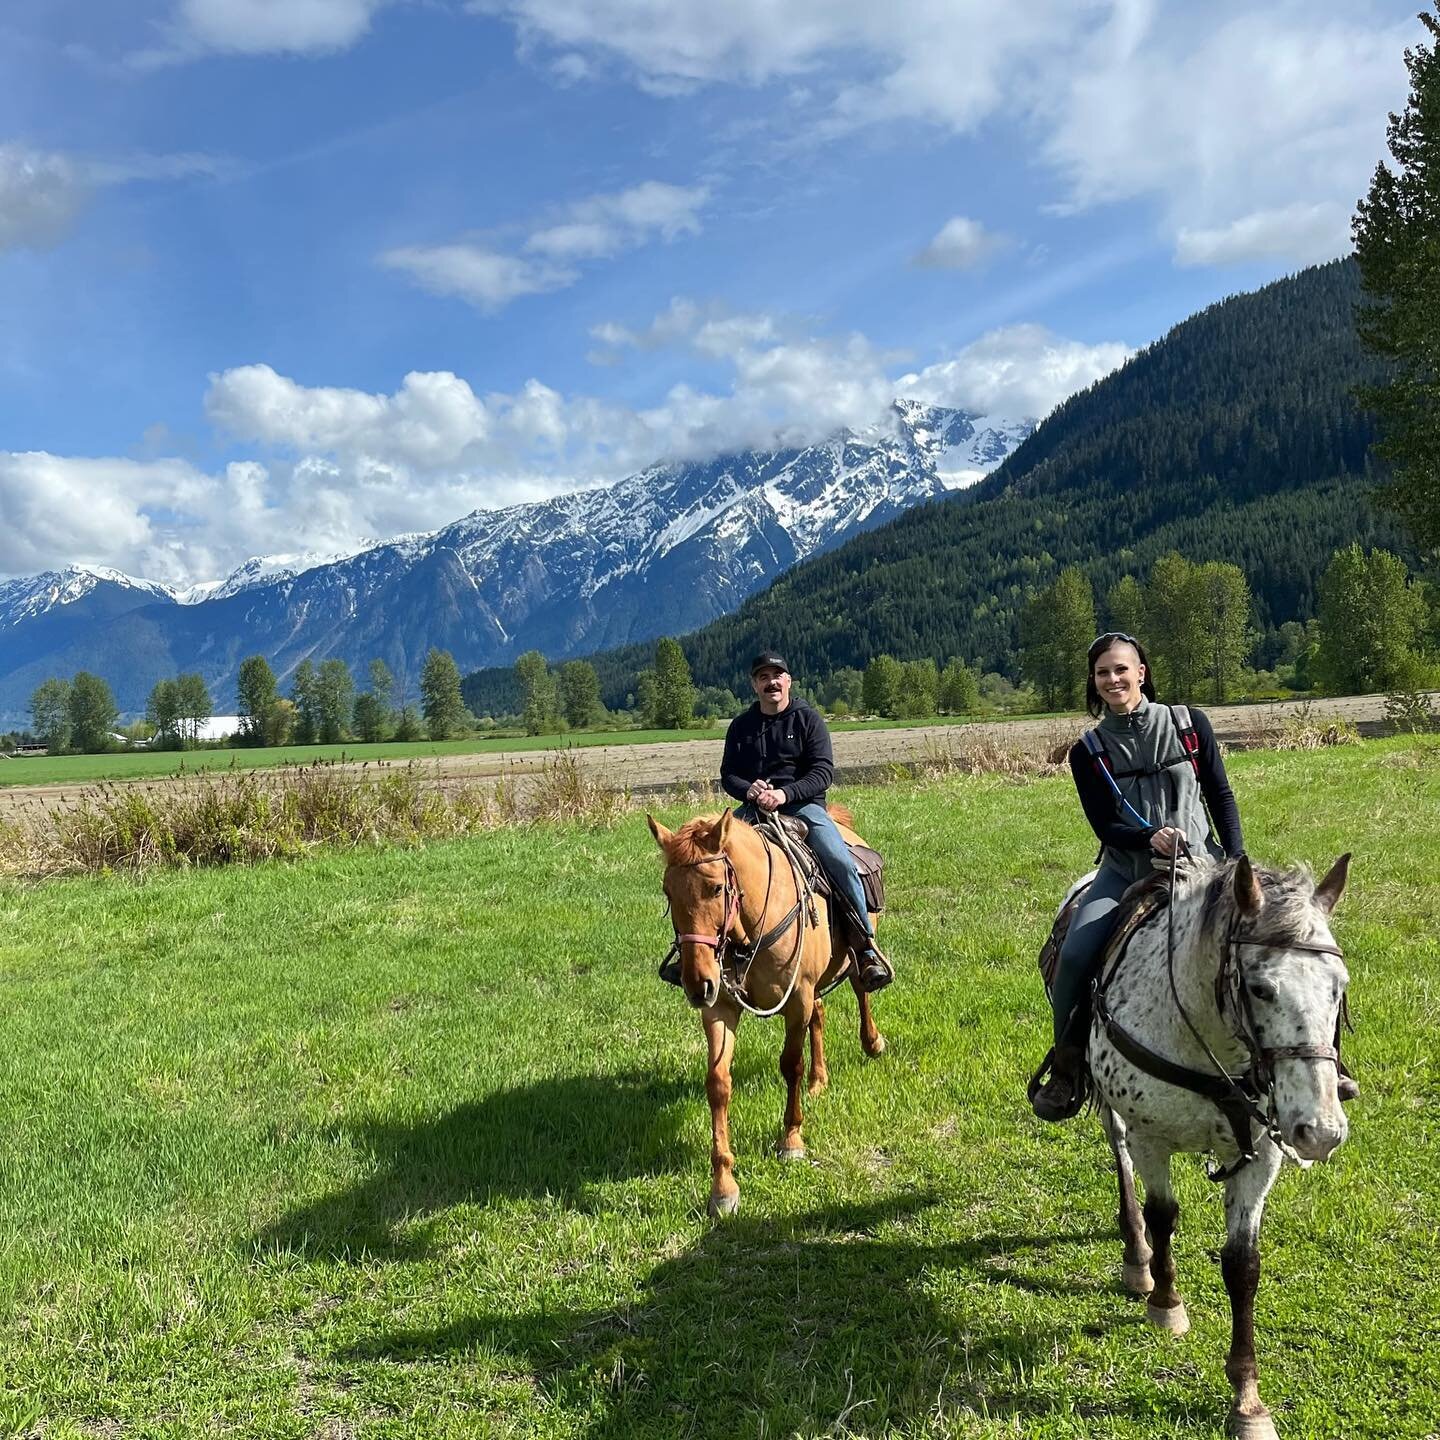 It&rsquo;s been a full week of sunshine and we can&rsquo;t get enough of it! Rain never stops us, but ya can&rsquo;t beat a sunny horseback ride ☀️

#cco #horseriding #horsebackriding  #coppercayseoutfitters #coppercayuse #pemberton #whistler #getout